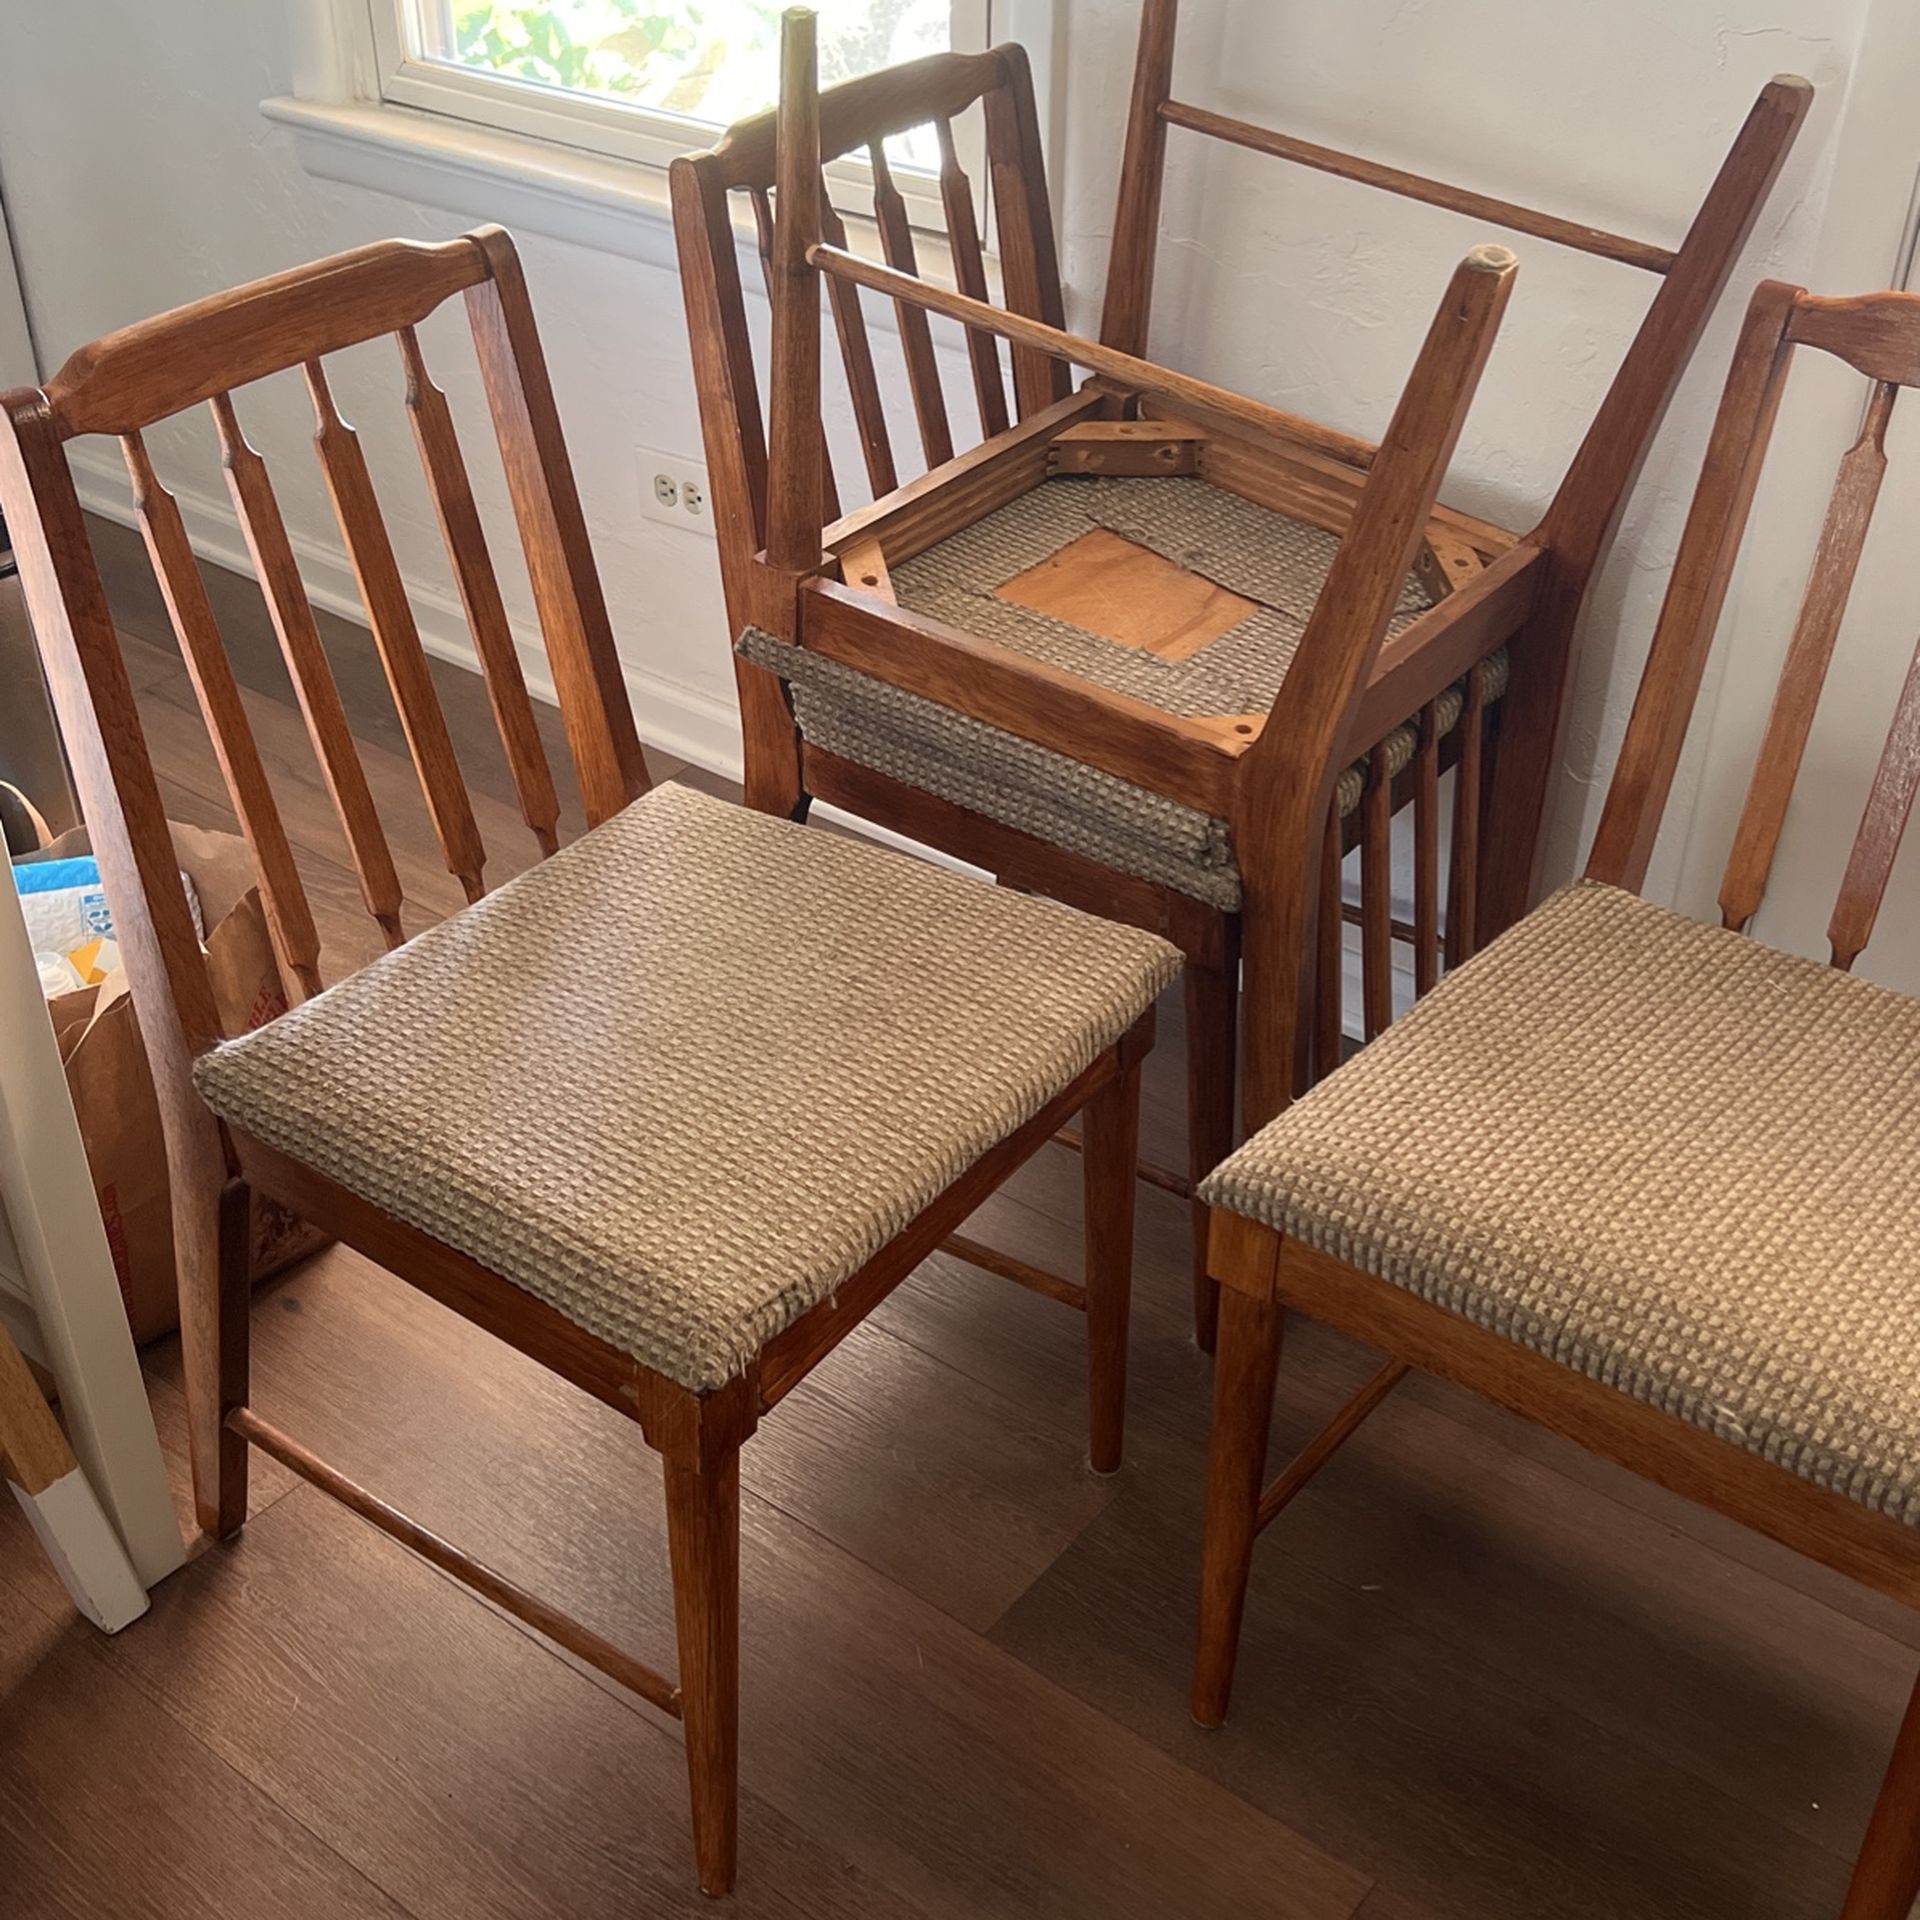 Dining Chairs (4) - Vintage Mid Century